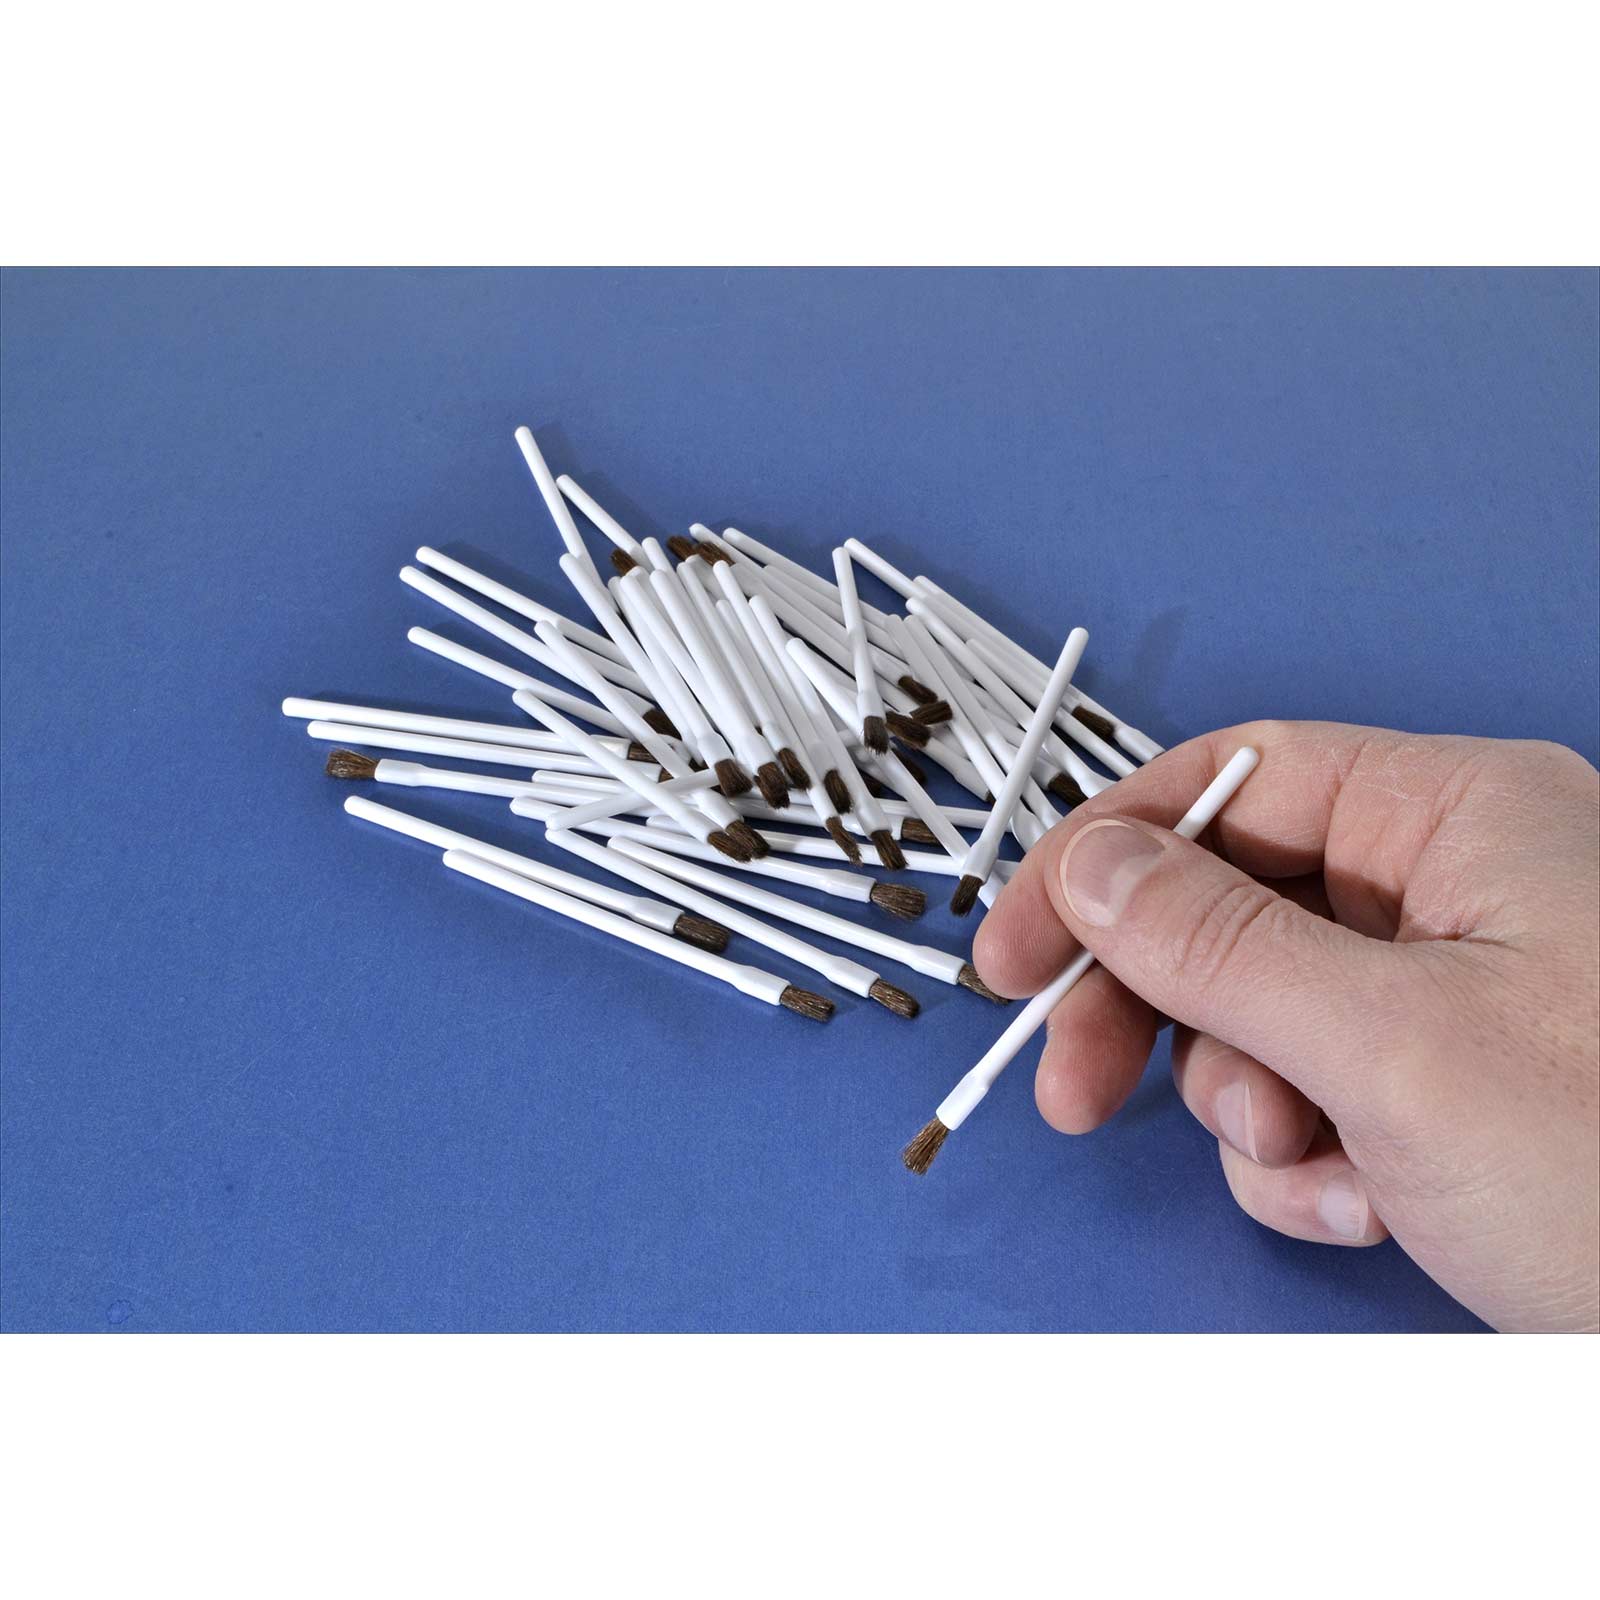 Applicators for Weathering Powders (50 pieces)